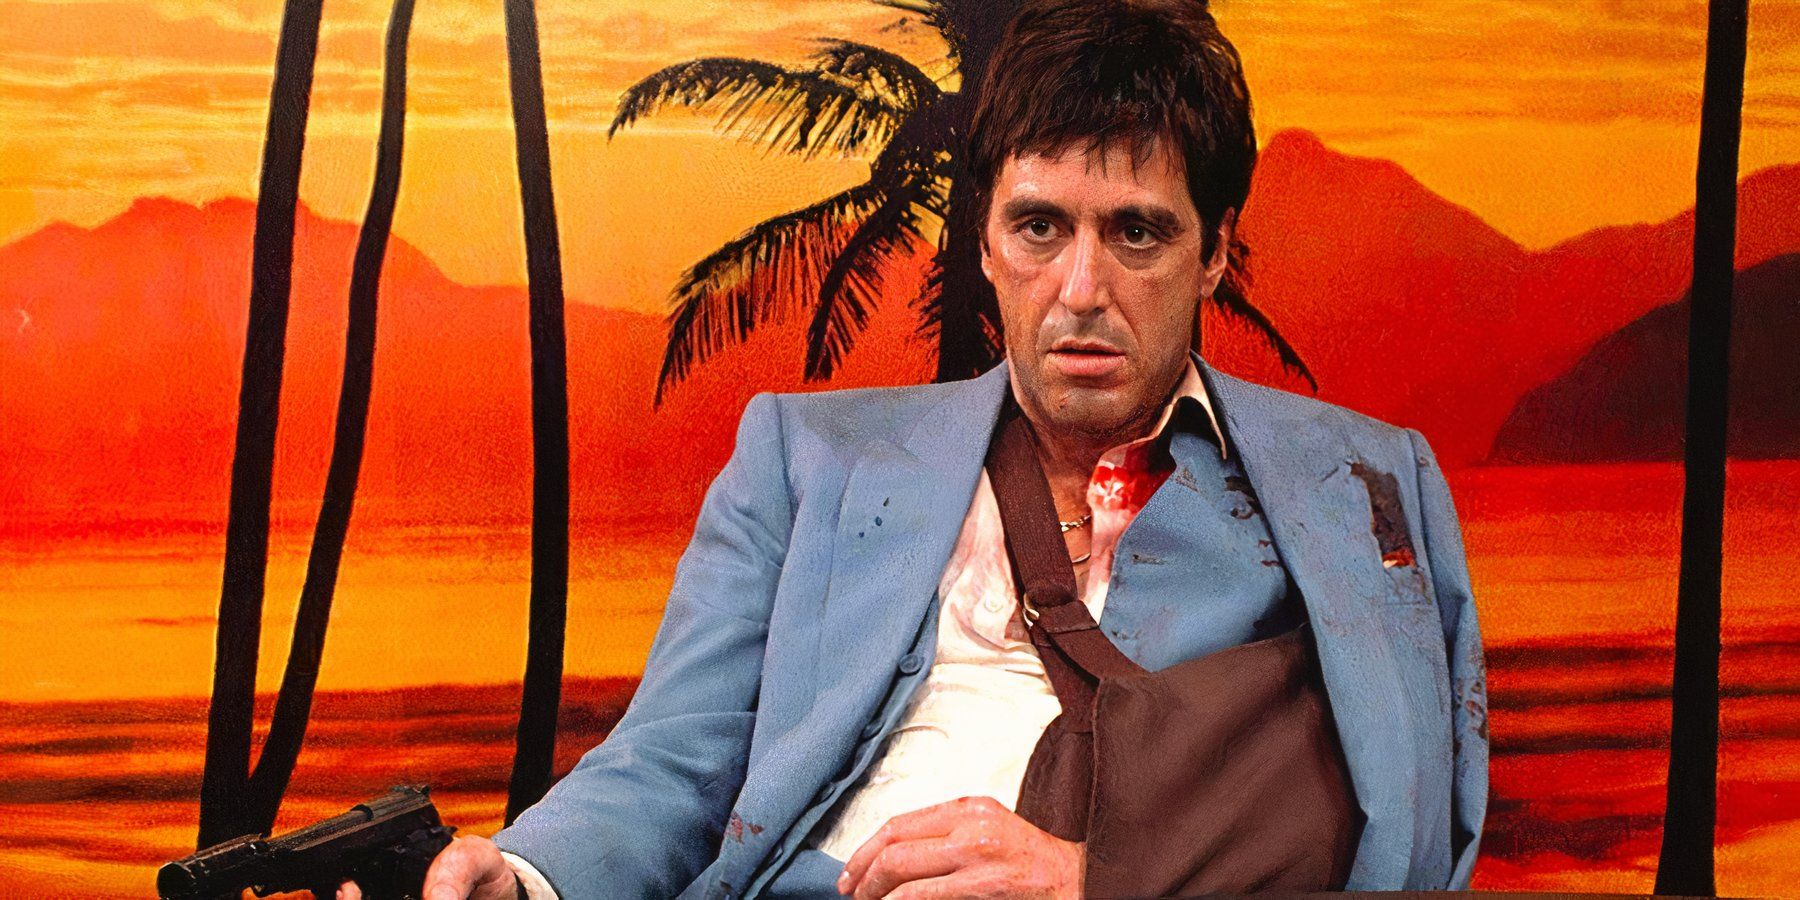 A bruised and bloody Tony Montana brandishes a gun with his arm in a sling in Scarface.